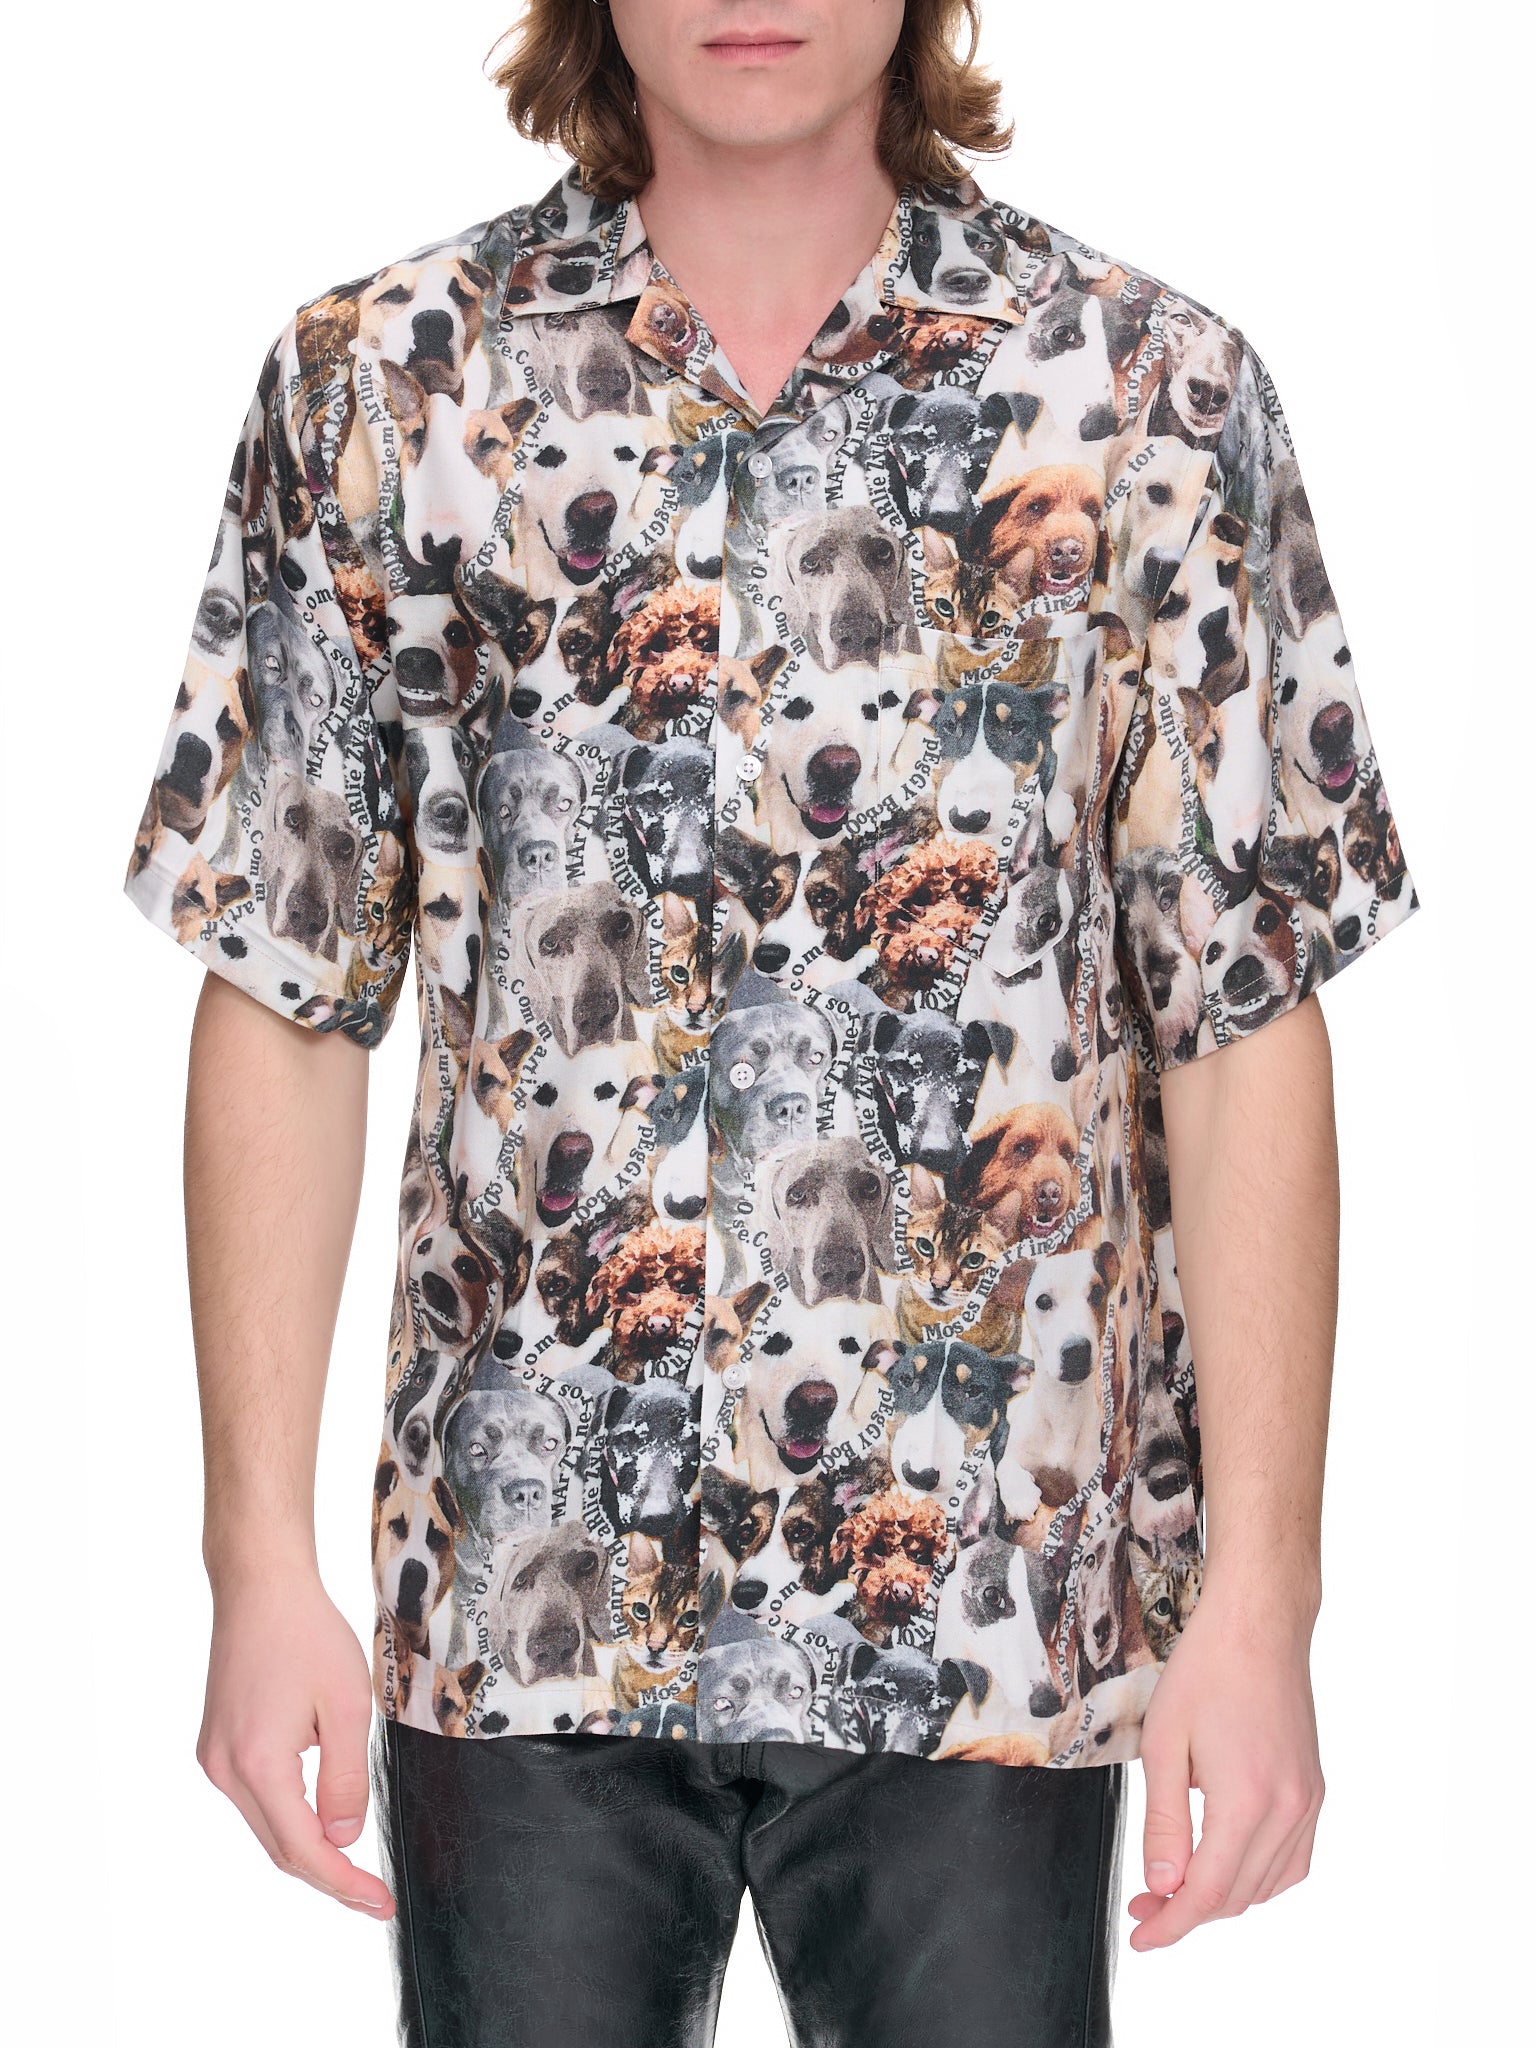 Cats Dogs Shirt (MR421-MRS-CATS-DOGS)